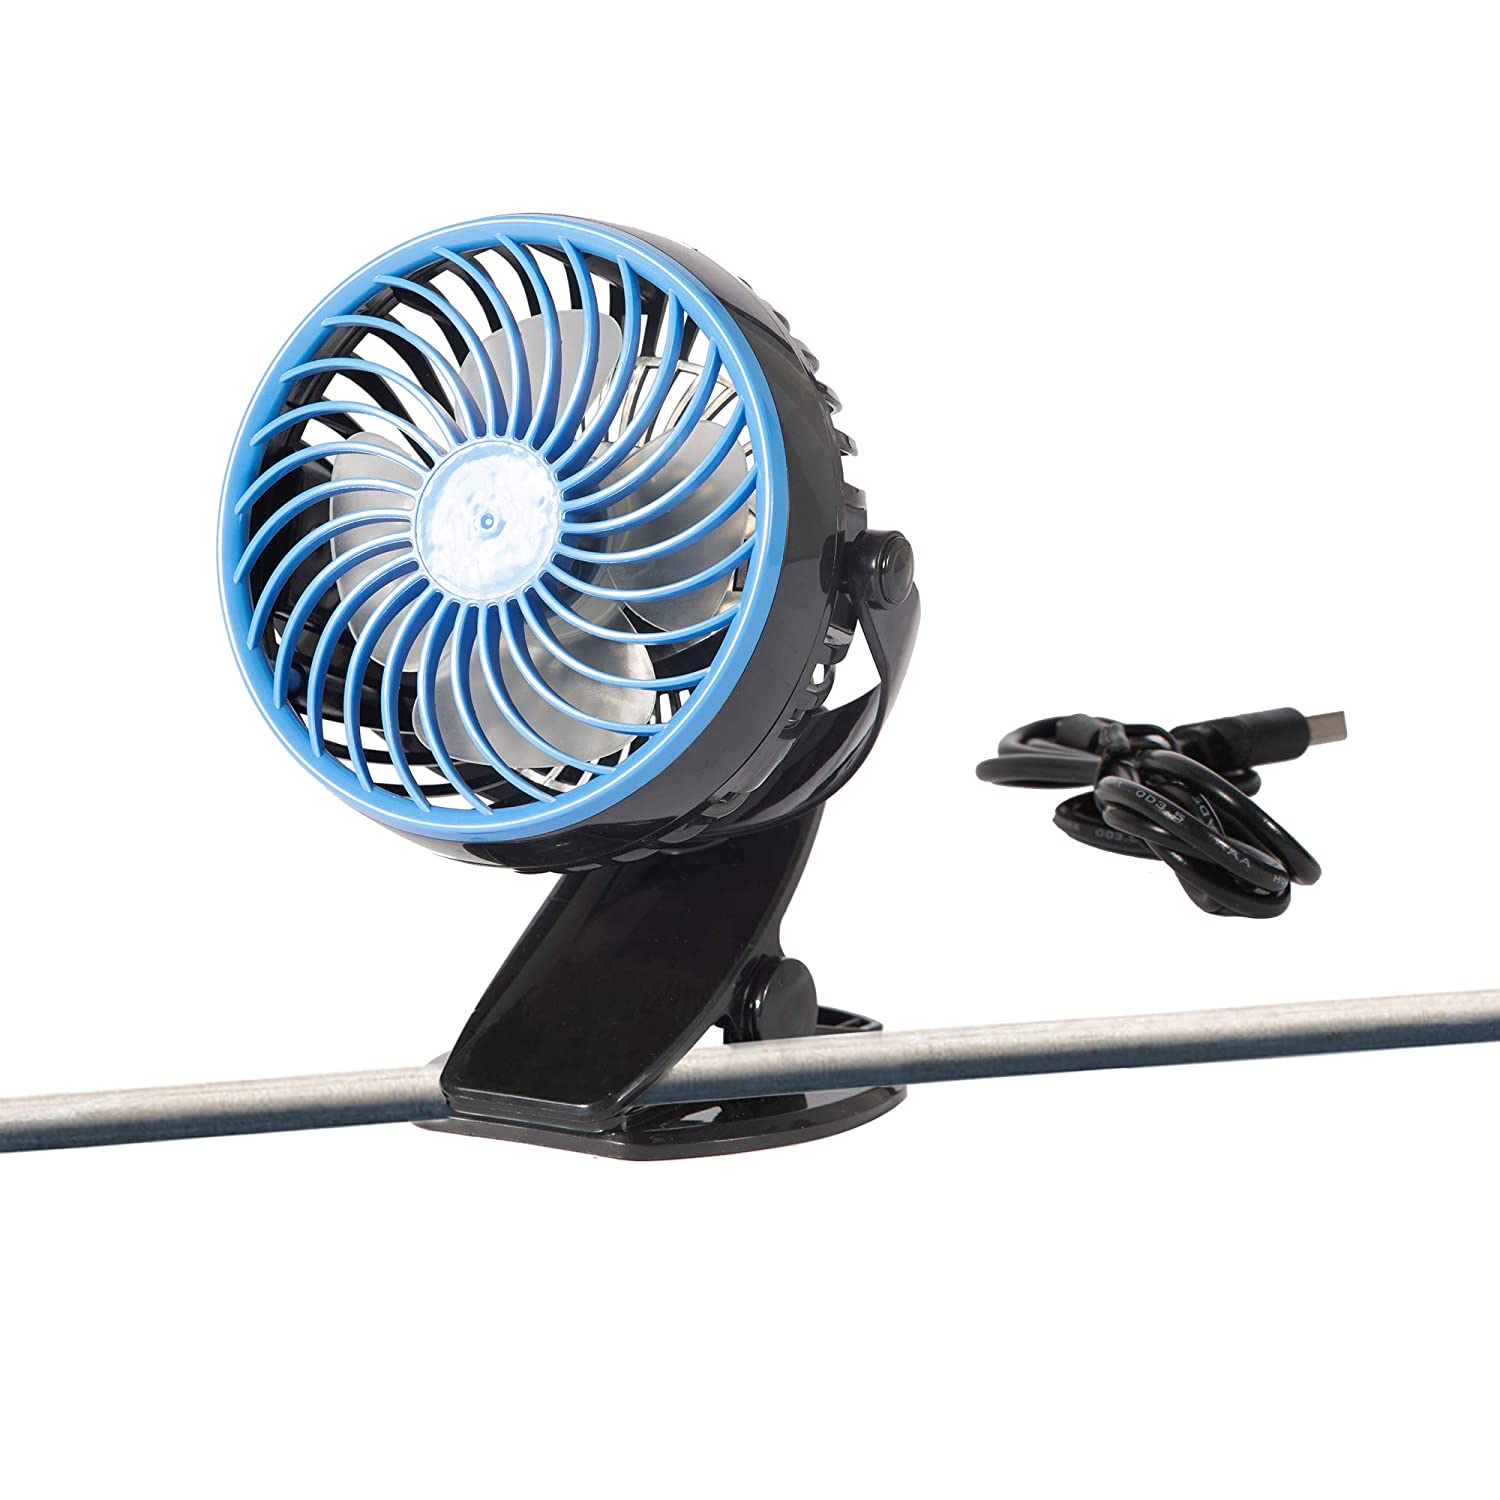 Clip on Desk Portable Fan for Stroller Battery Operated Small Personal Fan for Treadmill Bed Grow Tent Rechargeable,USB Powered Lithium Ion Fan